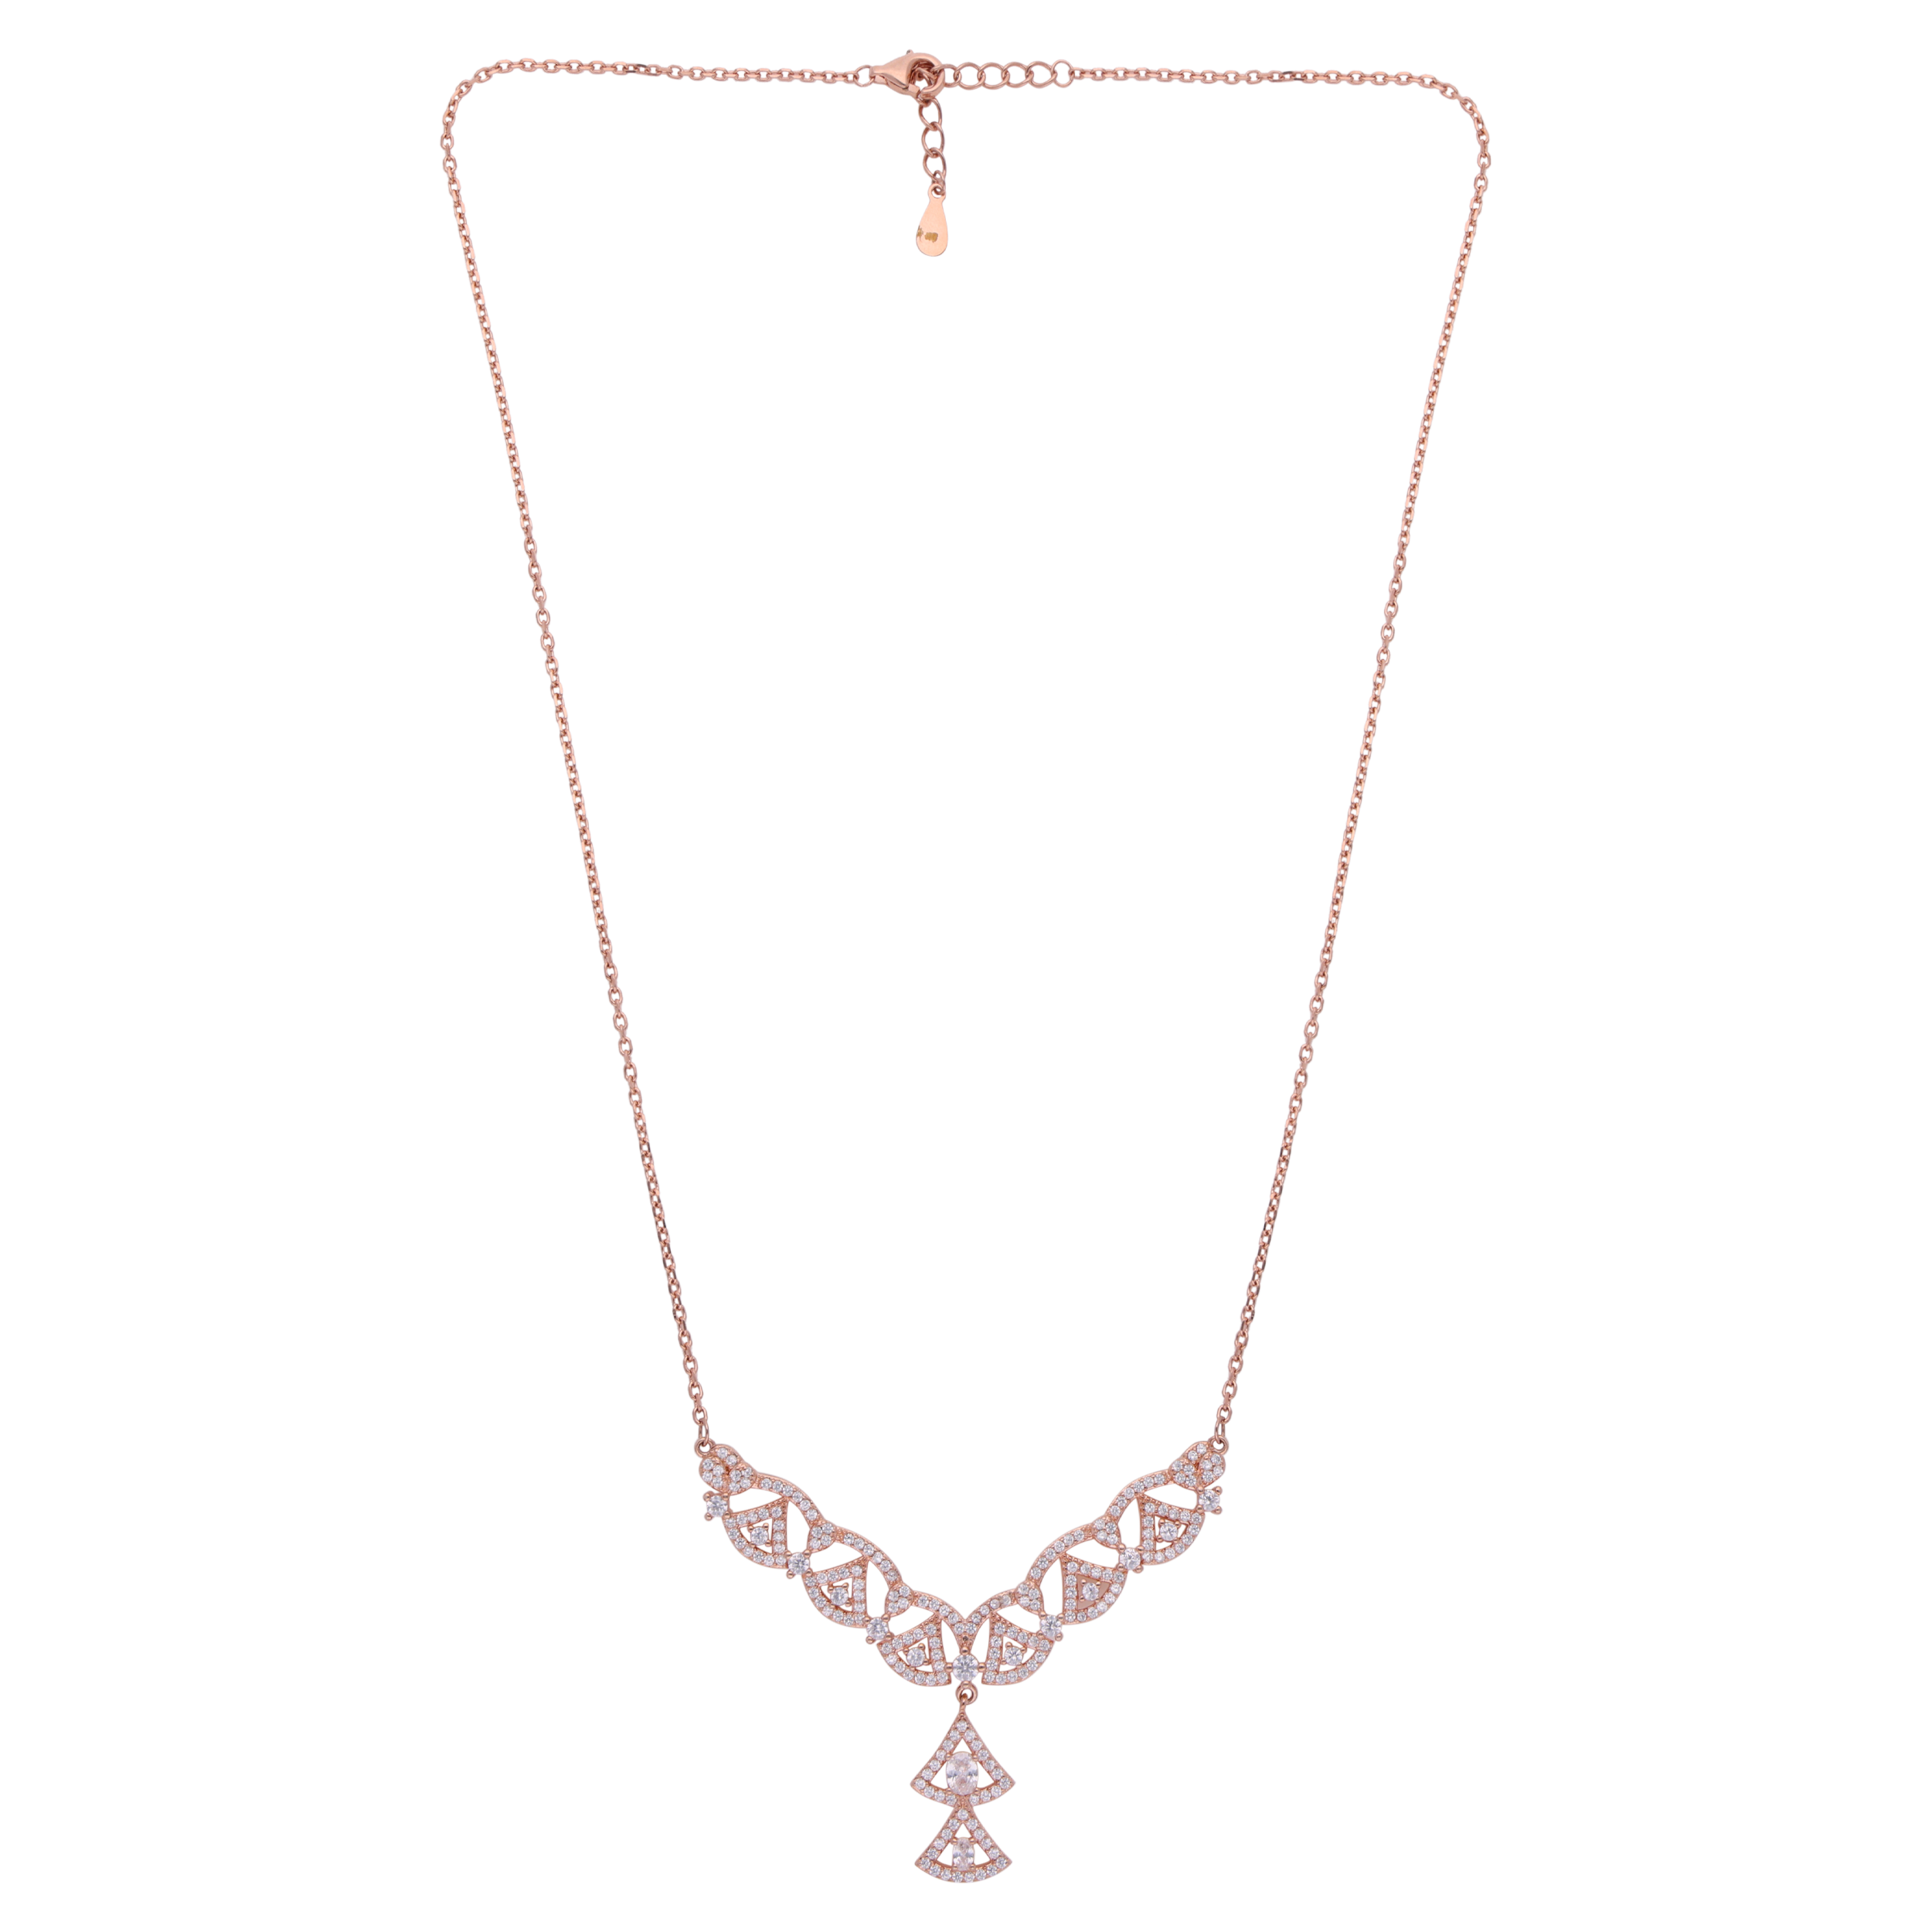 Radiant Rose: Sterling Silver Double Hood Chain Pendant | SKU : 0003113981, 0003114025